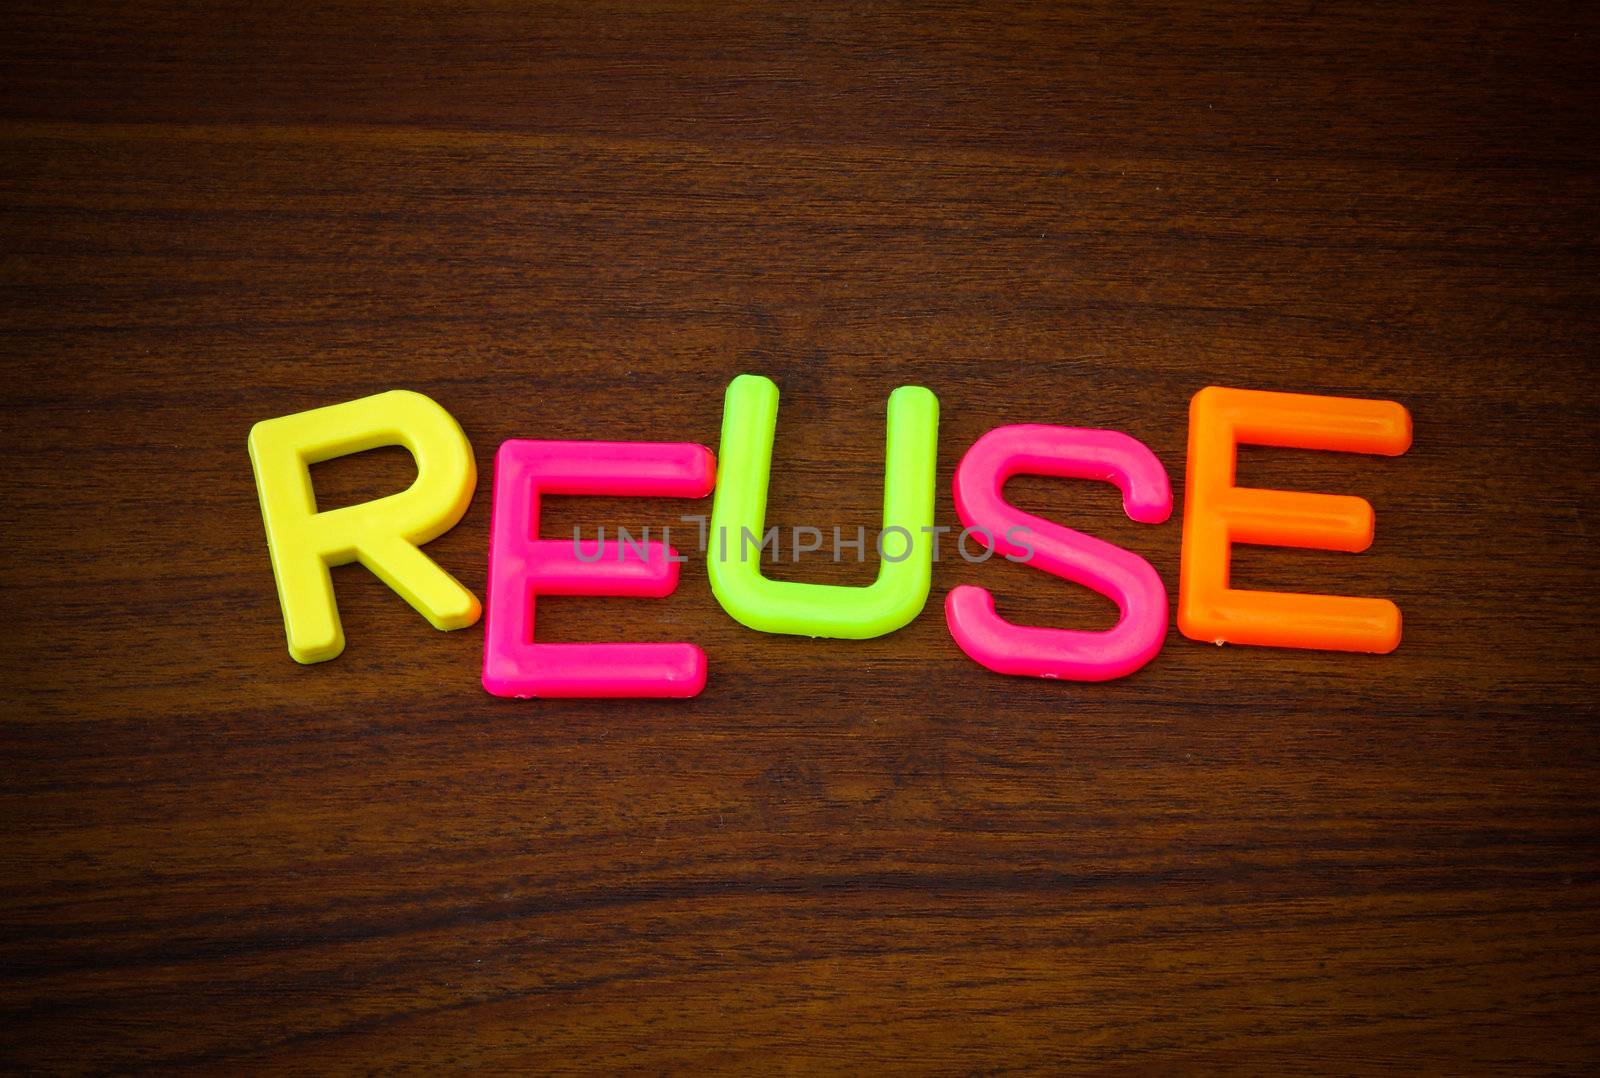 Reuse in colorful toy letters on wood background  by nuchylee